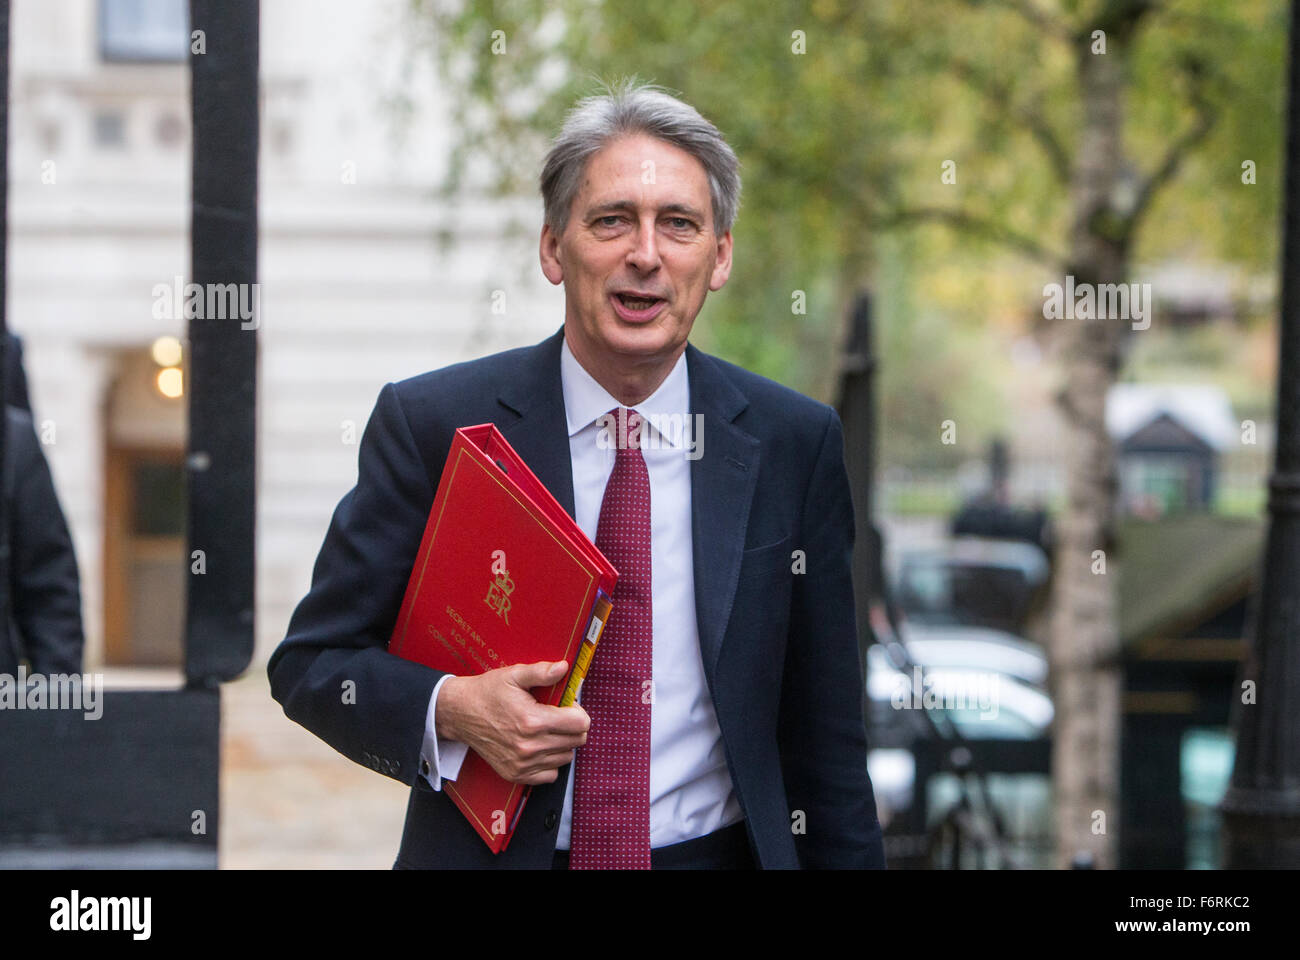 Philip Hammond,Secretary of State for Foreign and Commonwealth Affairs,arrives at Downing Street for a Cabinet meeting. Stock Photo